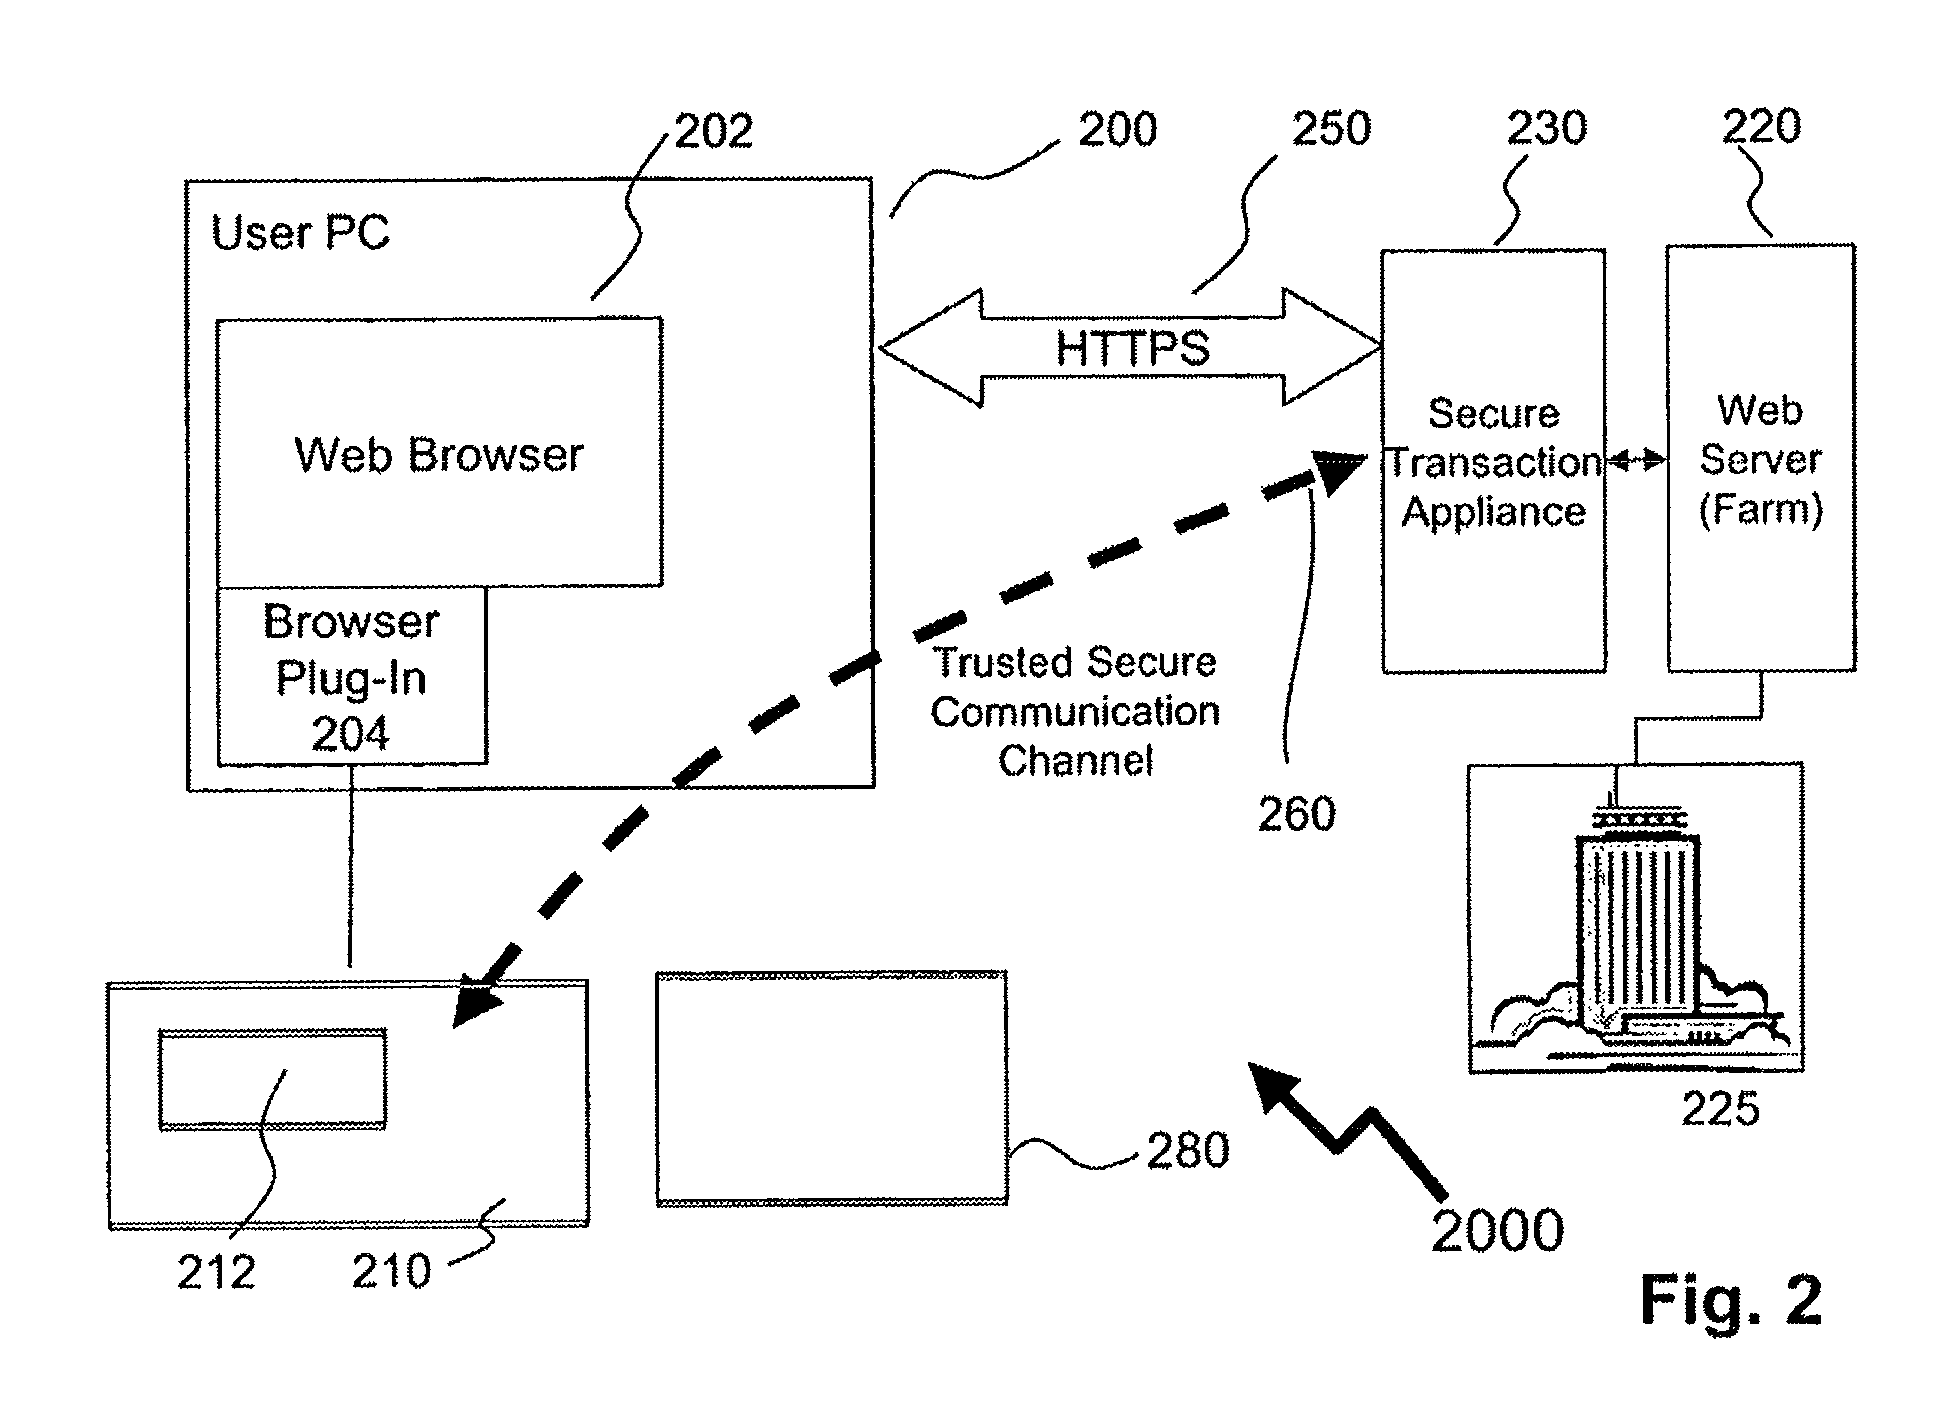 Method of providing assured transactions using secure transaction appliance and watermark verification